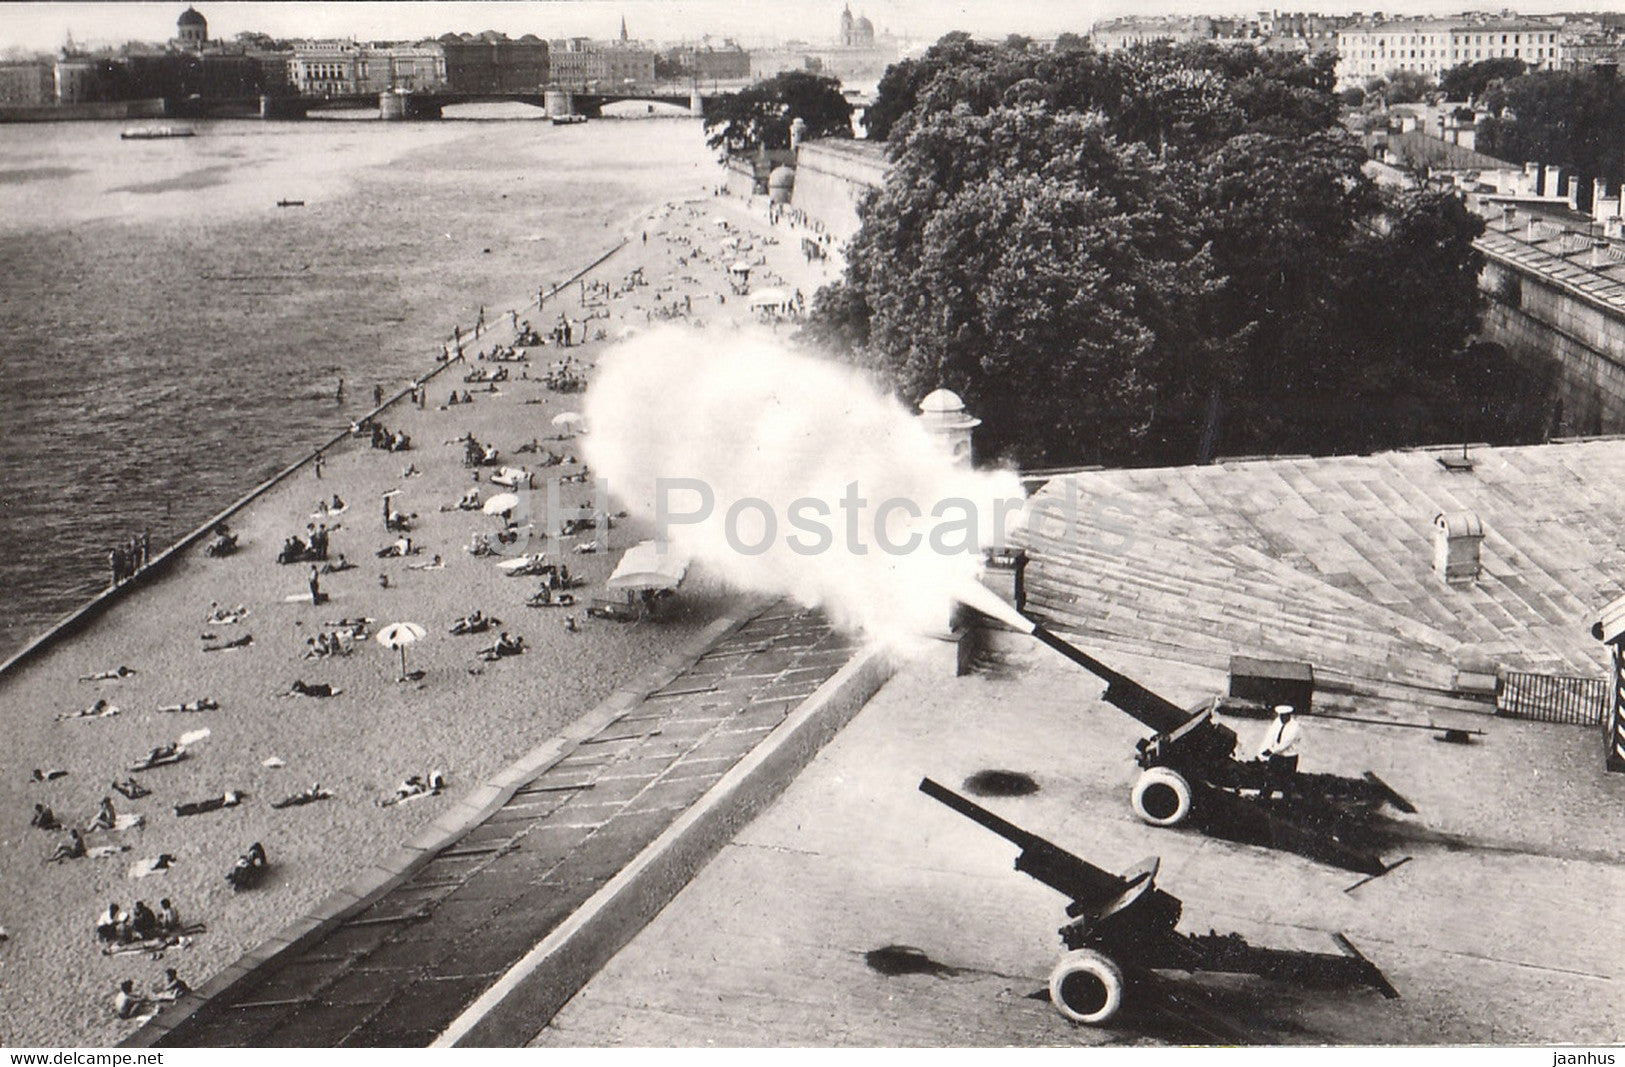 Leningrad - St Petersburg - Peter and Paul Fortress - noon shot cannons - 1985 - Russia USSR - unused - JH Postcards